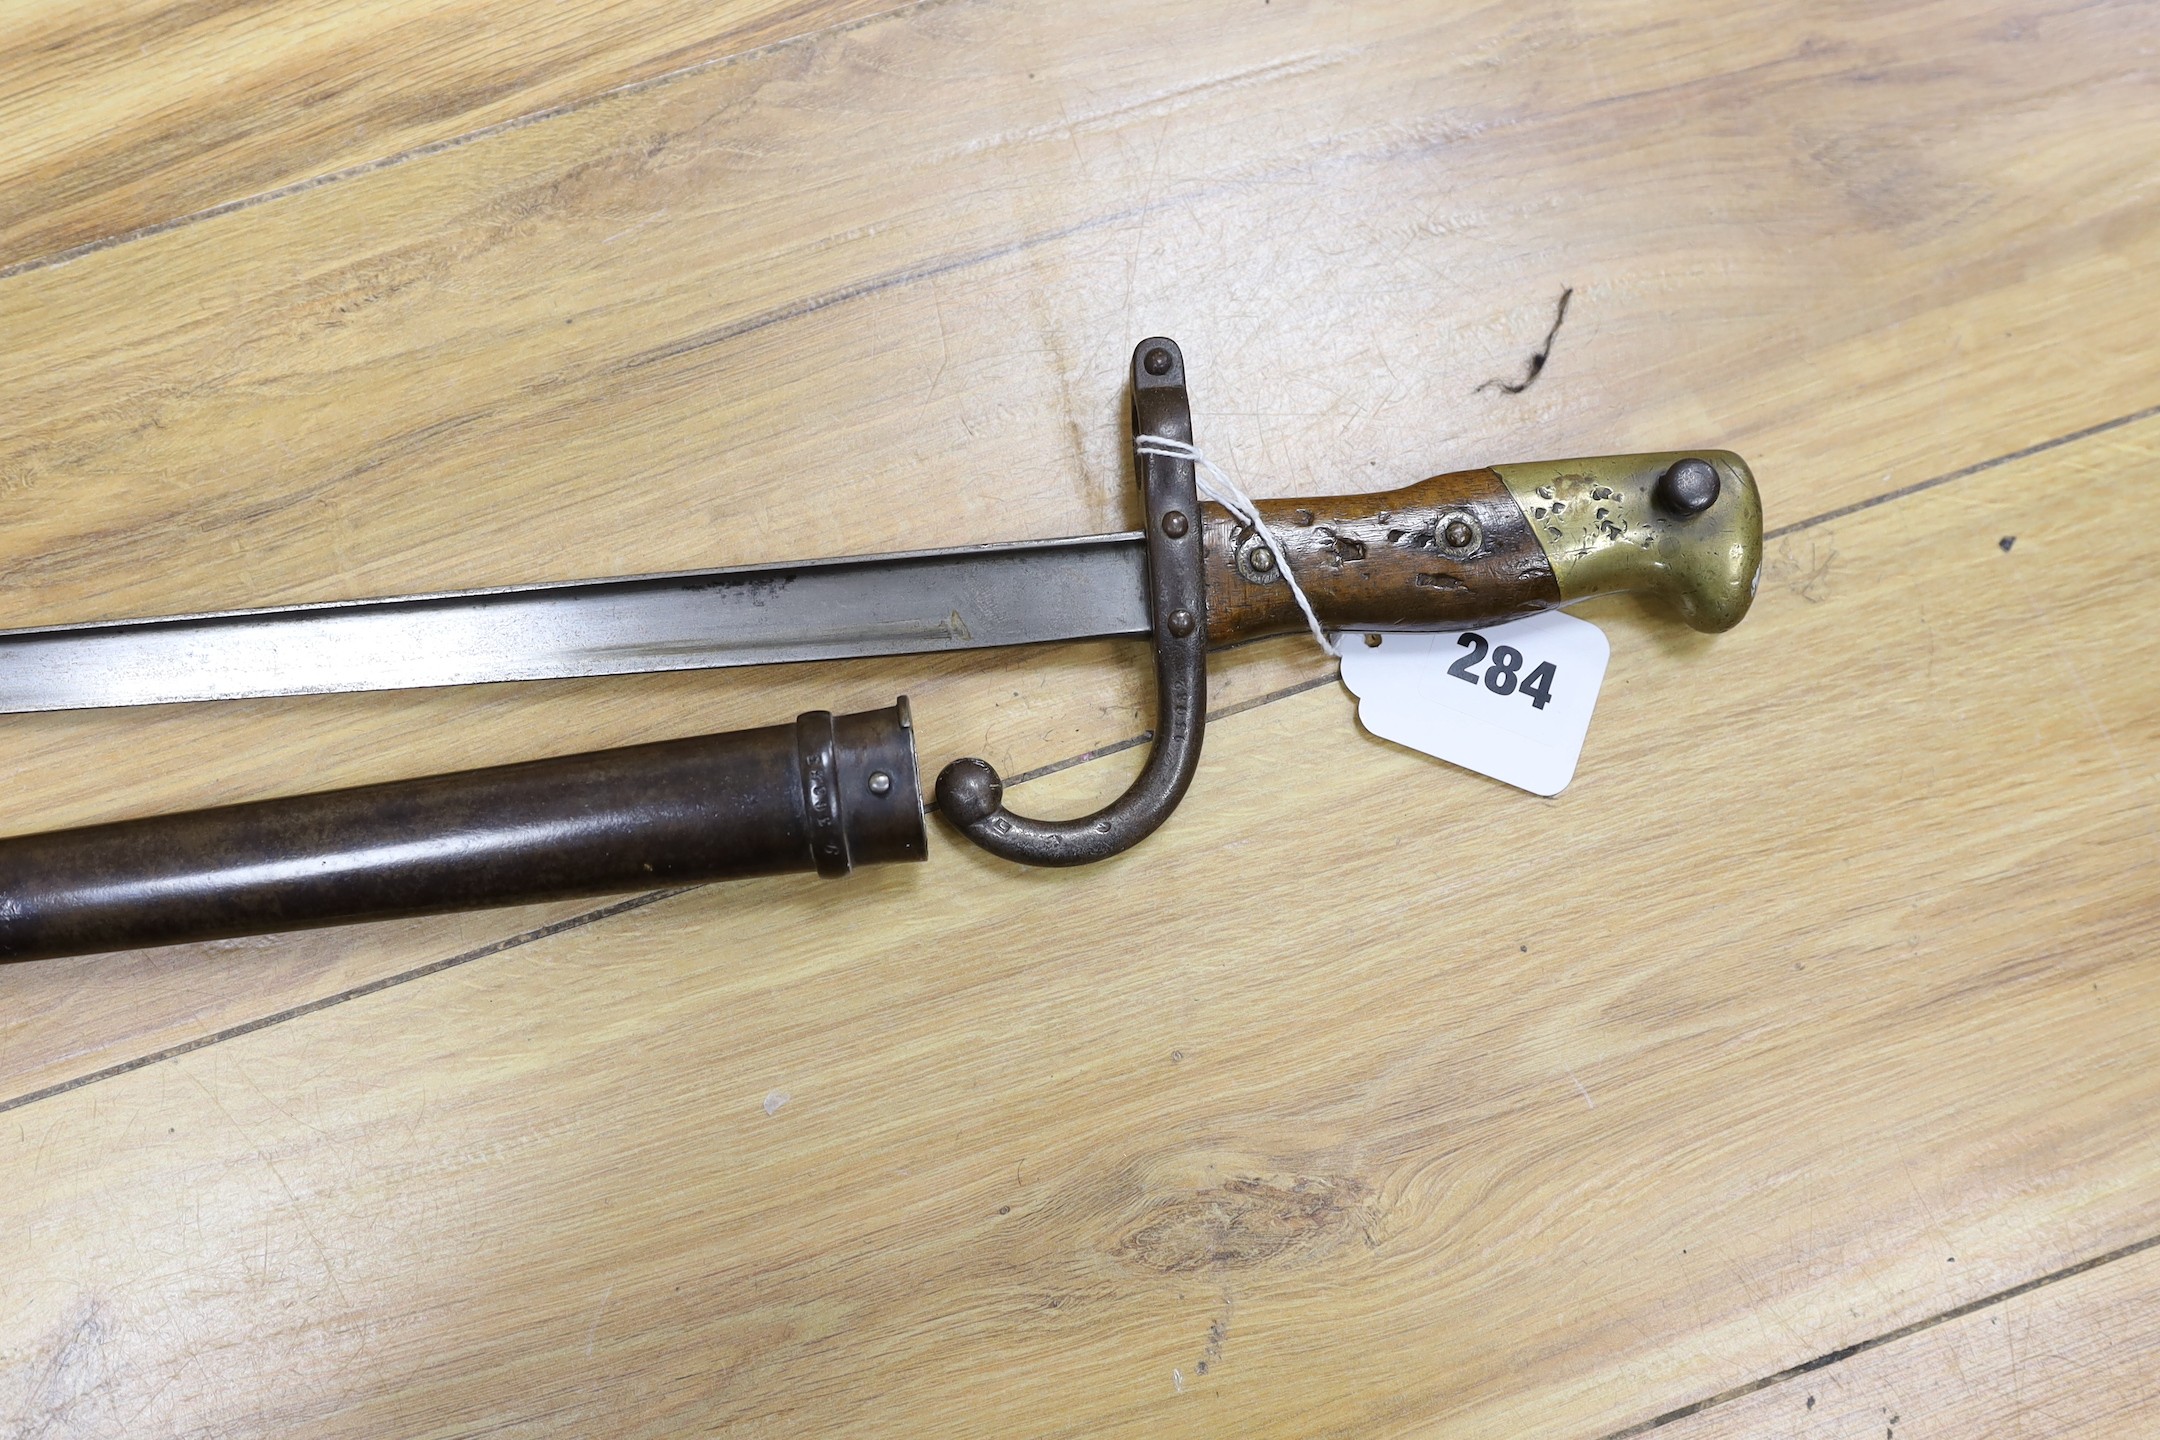 A Victorian officer's sword, lacking sheath, together with a 19th century French ’1877’ bayonet and sheath